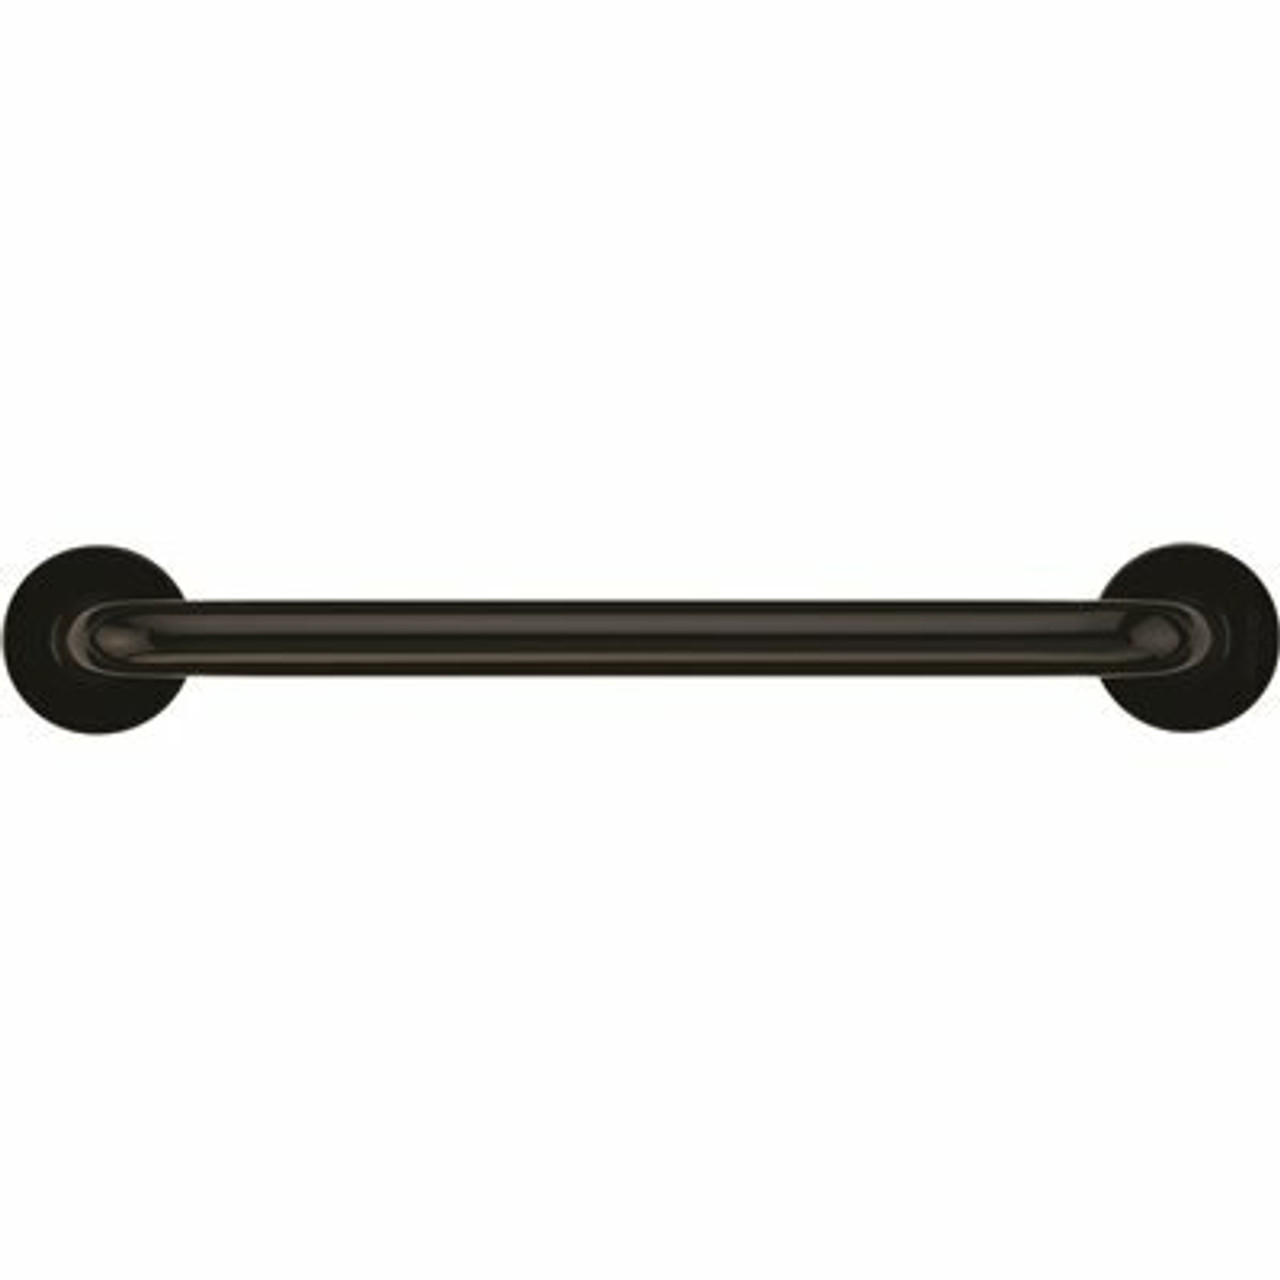 Ponte Giulio Usa 48 In. Contractor Antimicrobial Vinyl Coated Grab Bar In Black